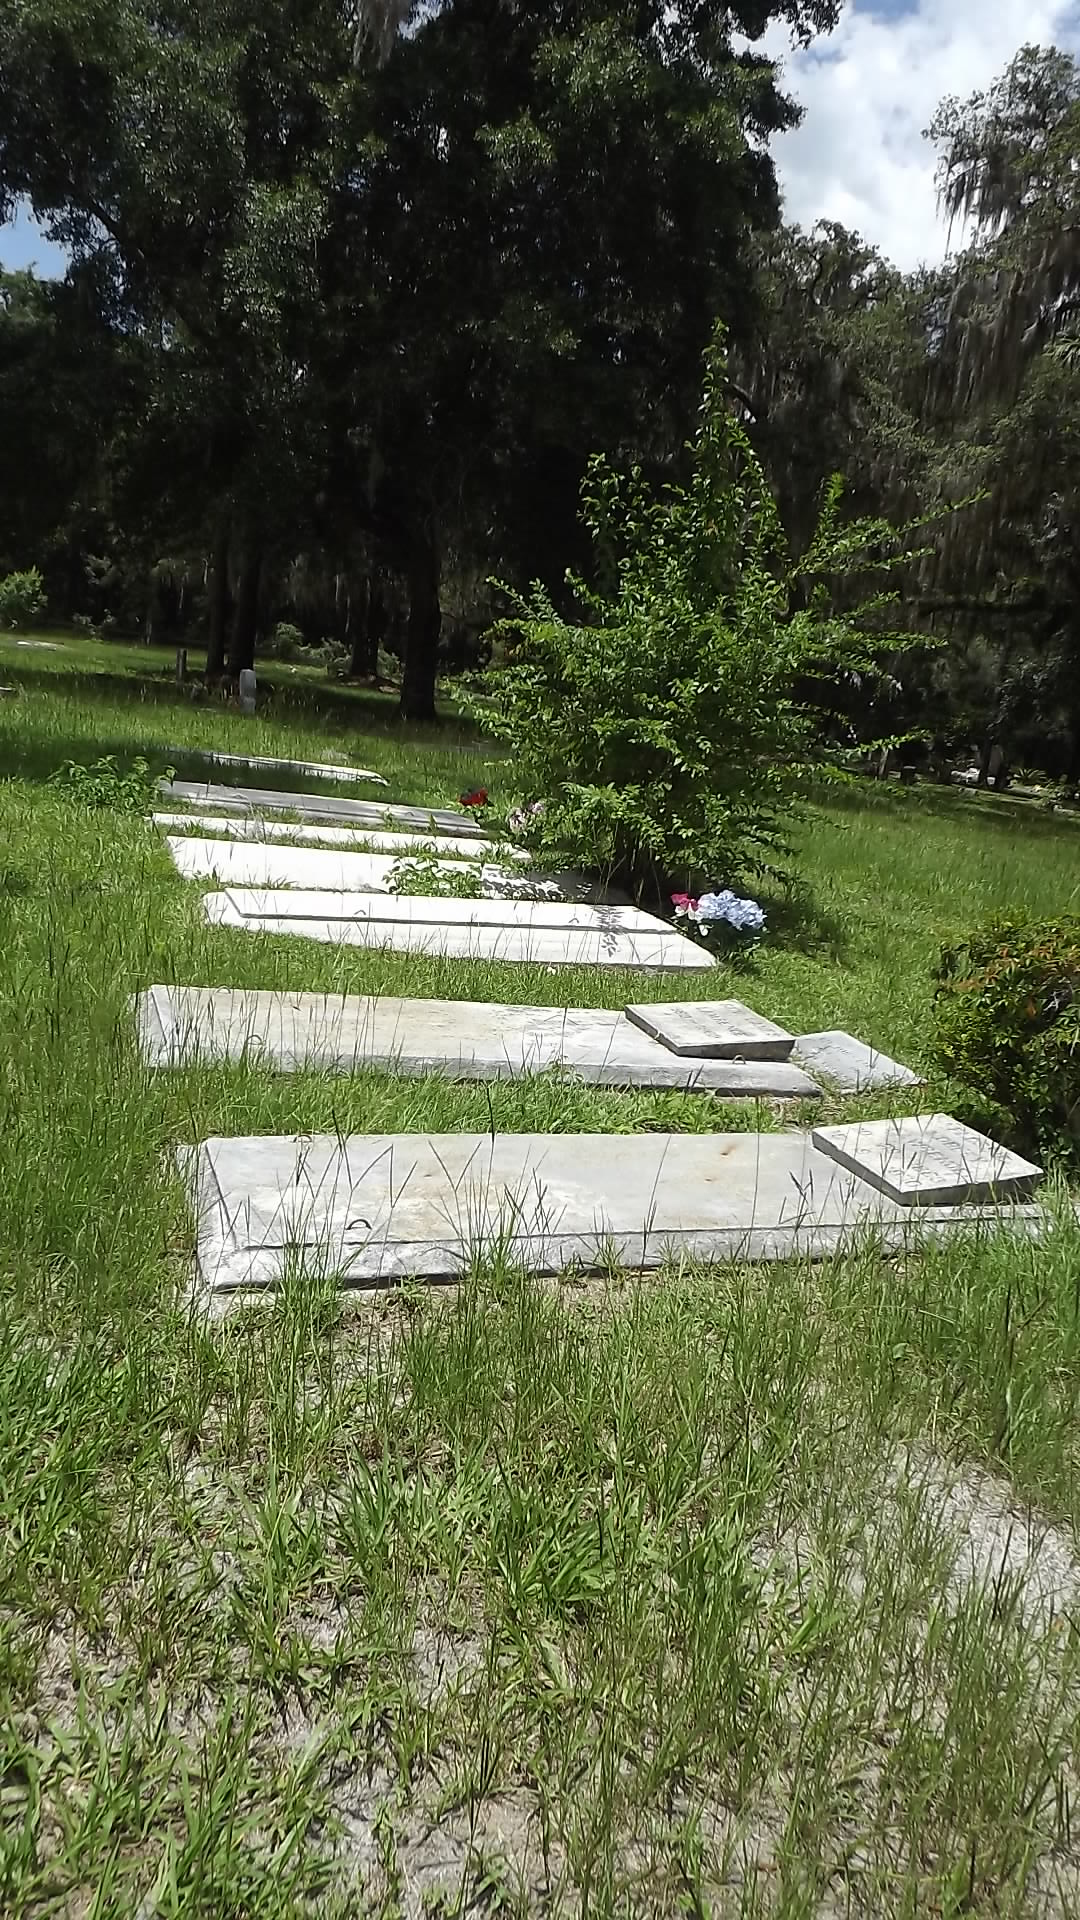 Graves in the Cemetery